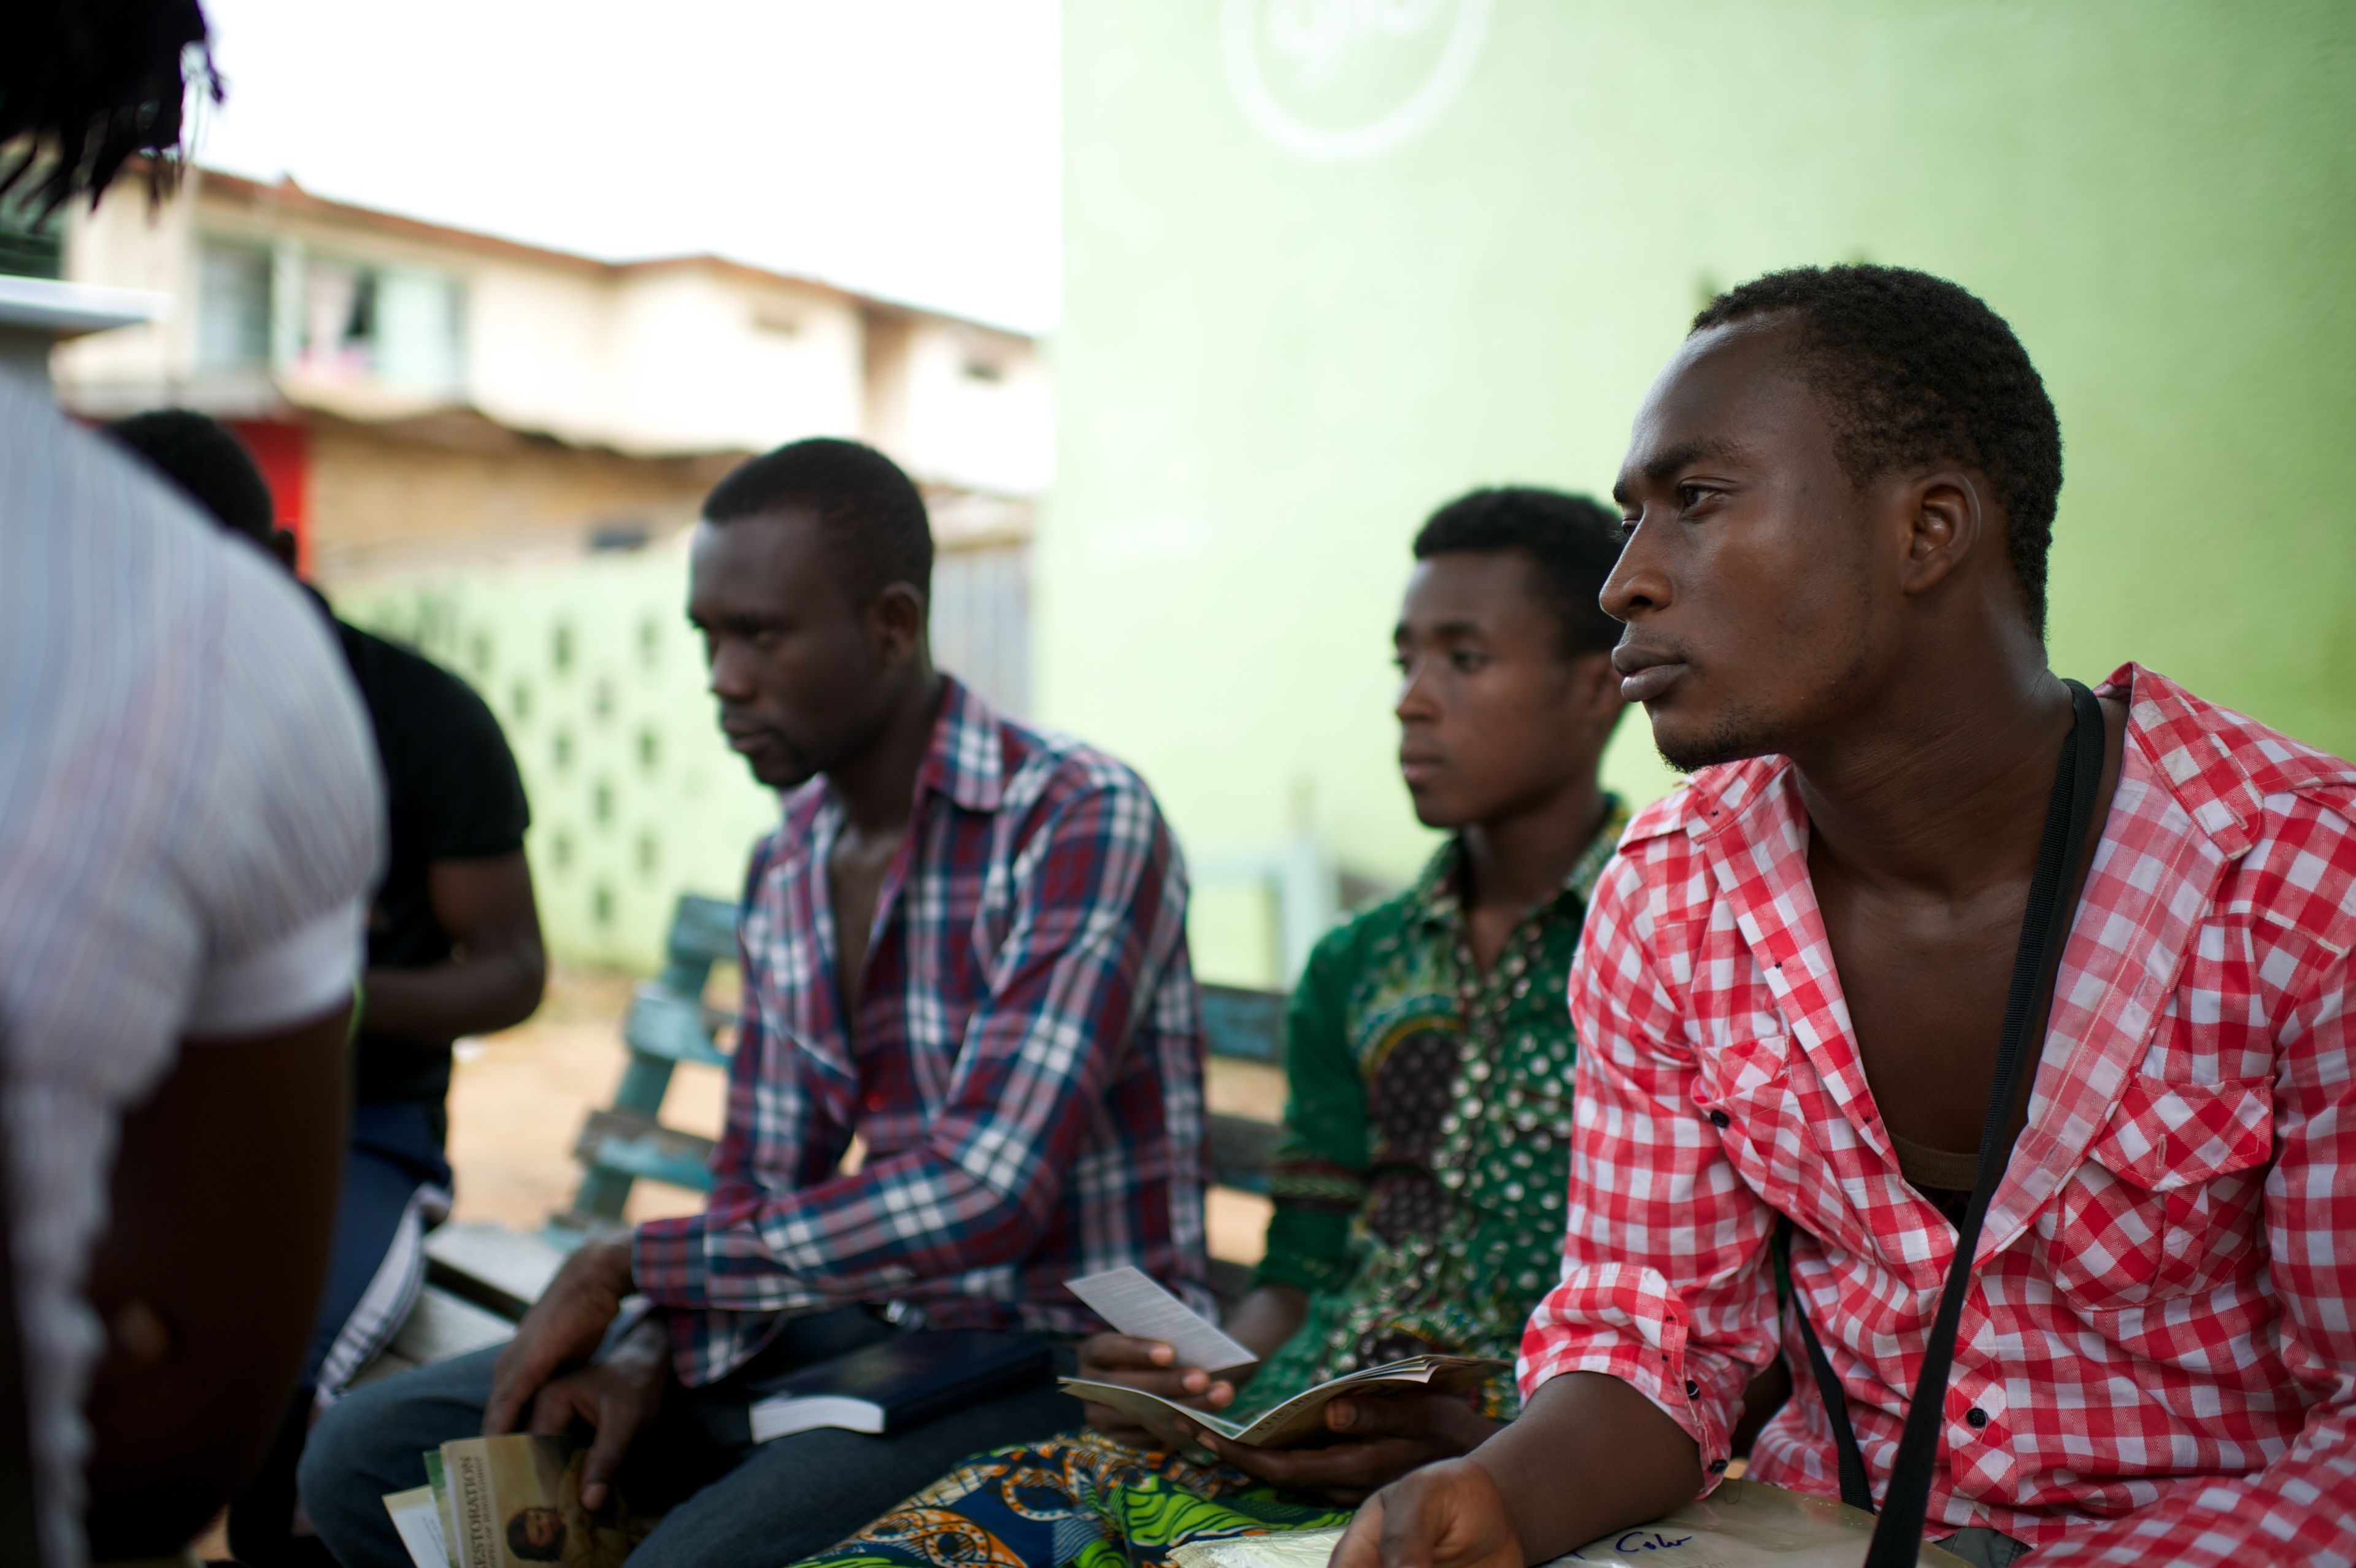 A group of young men in Africa sit on a bench while looking at gospel pamphlets.